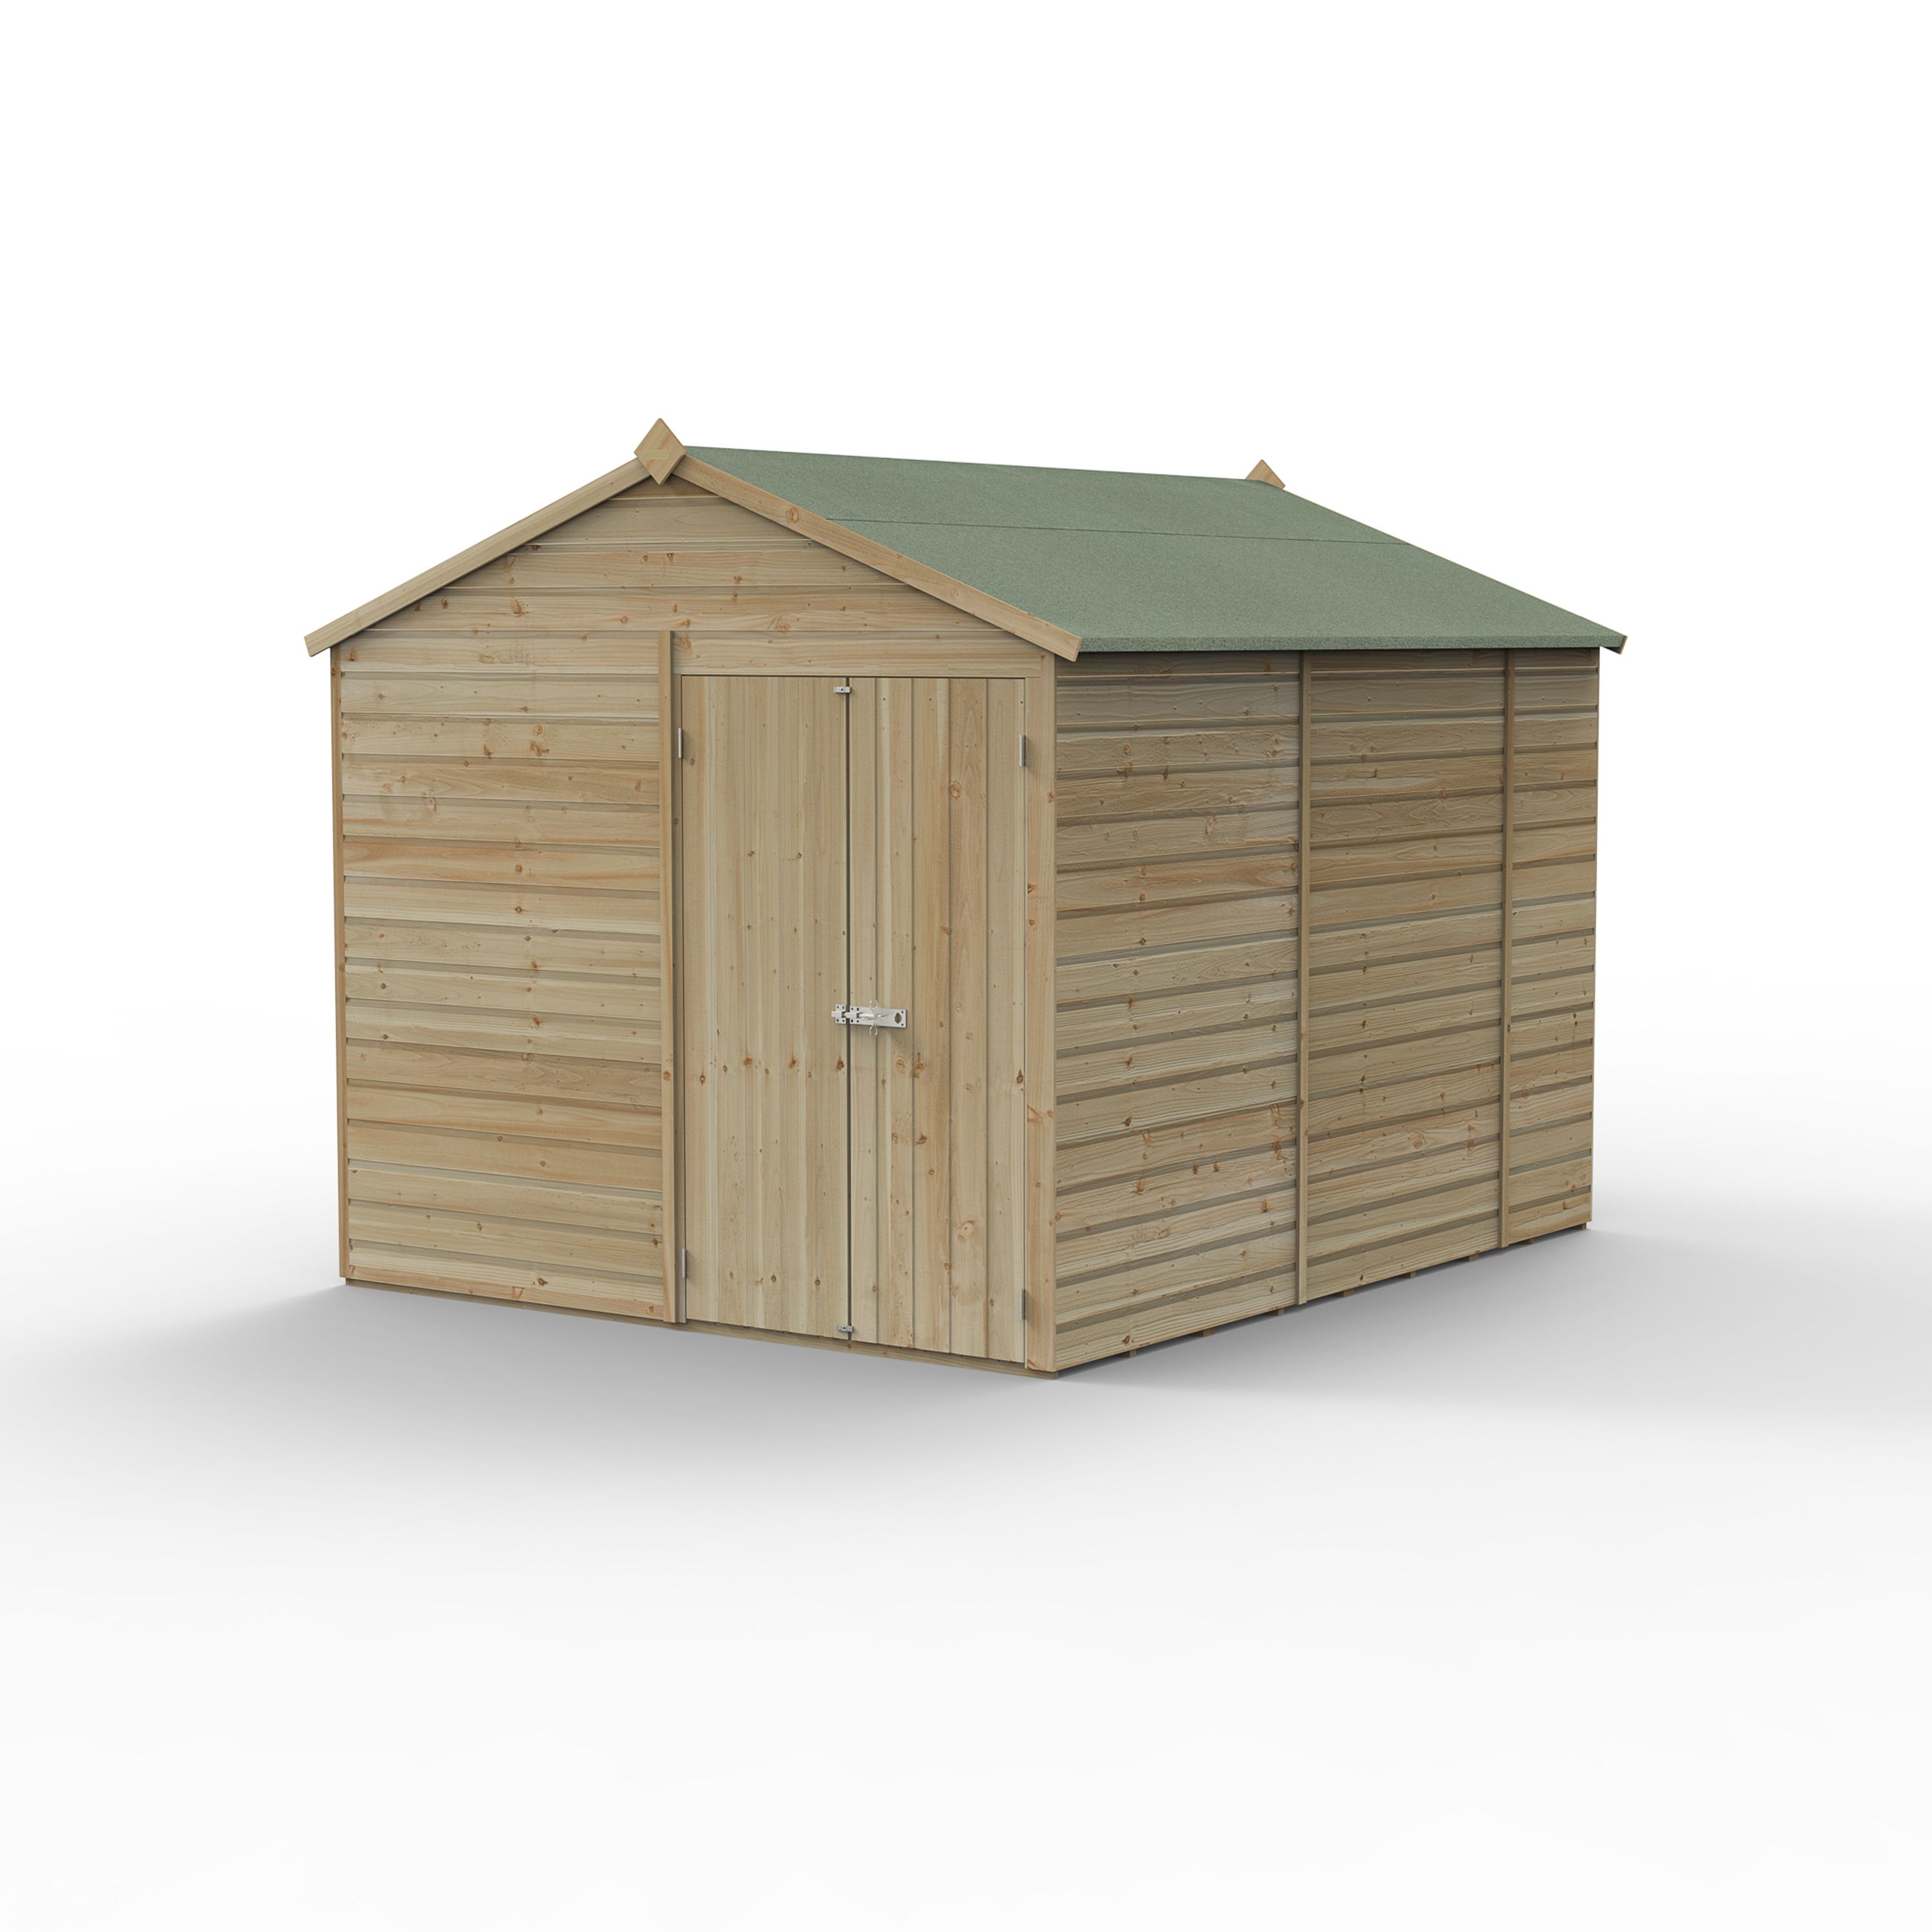 Forest Garden Beckwood 10x8 ft Apex Natural timber Wooden 2 door Shed with floor (Base included) - Assembly not required